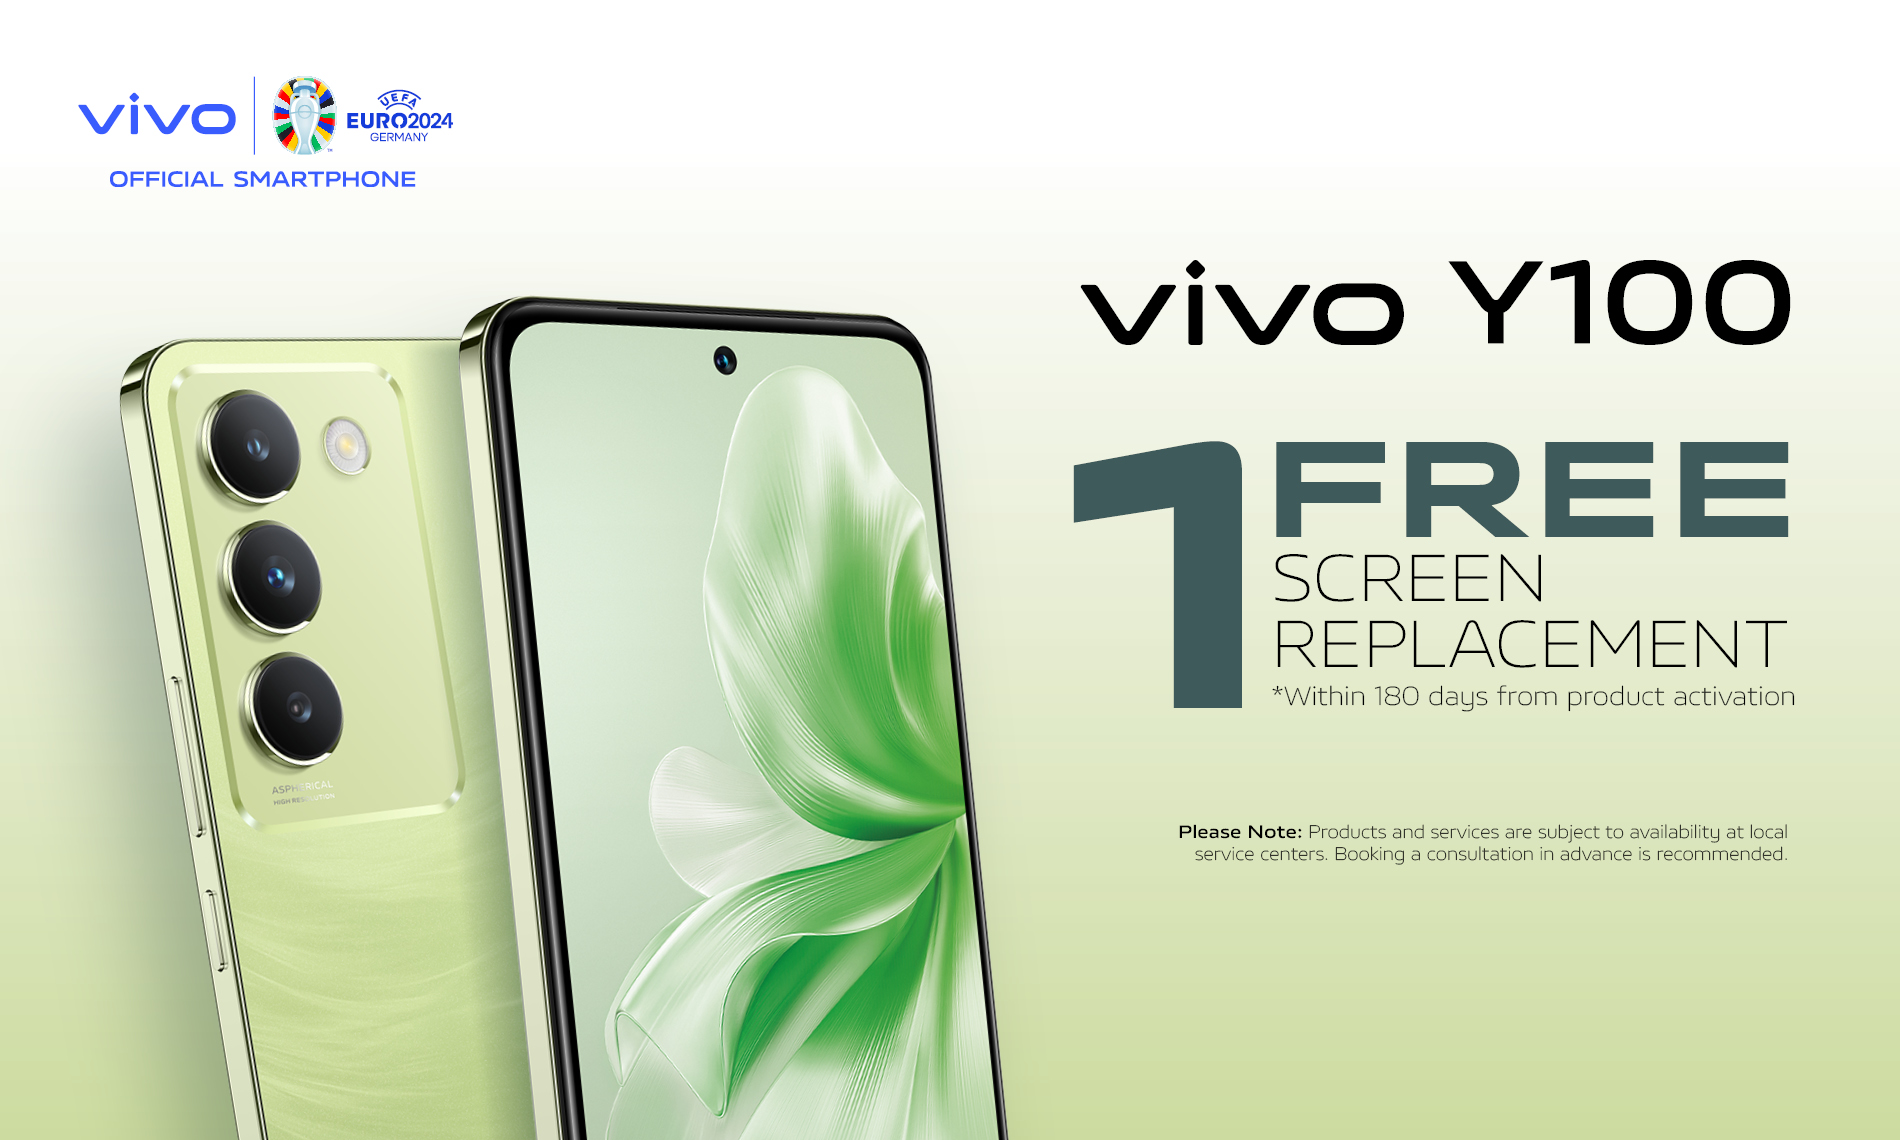 1 Free Screen Replacement